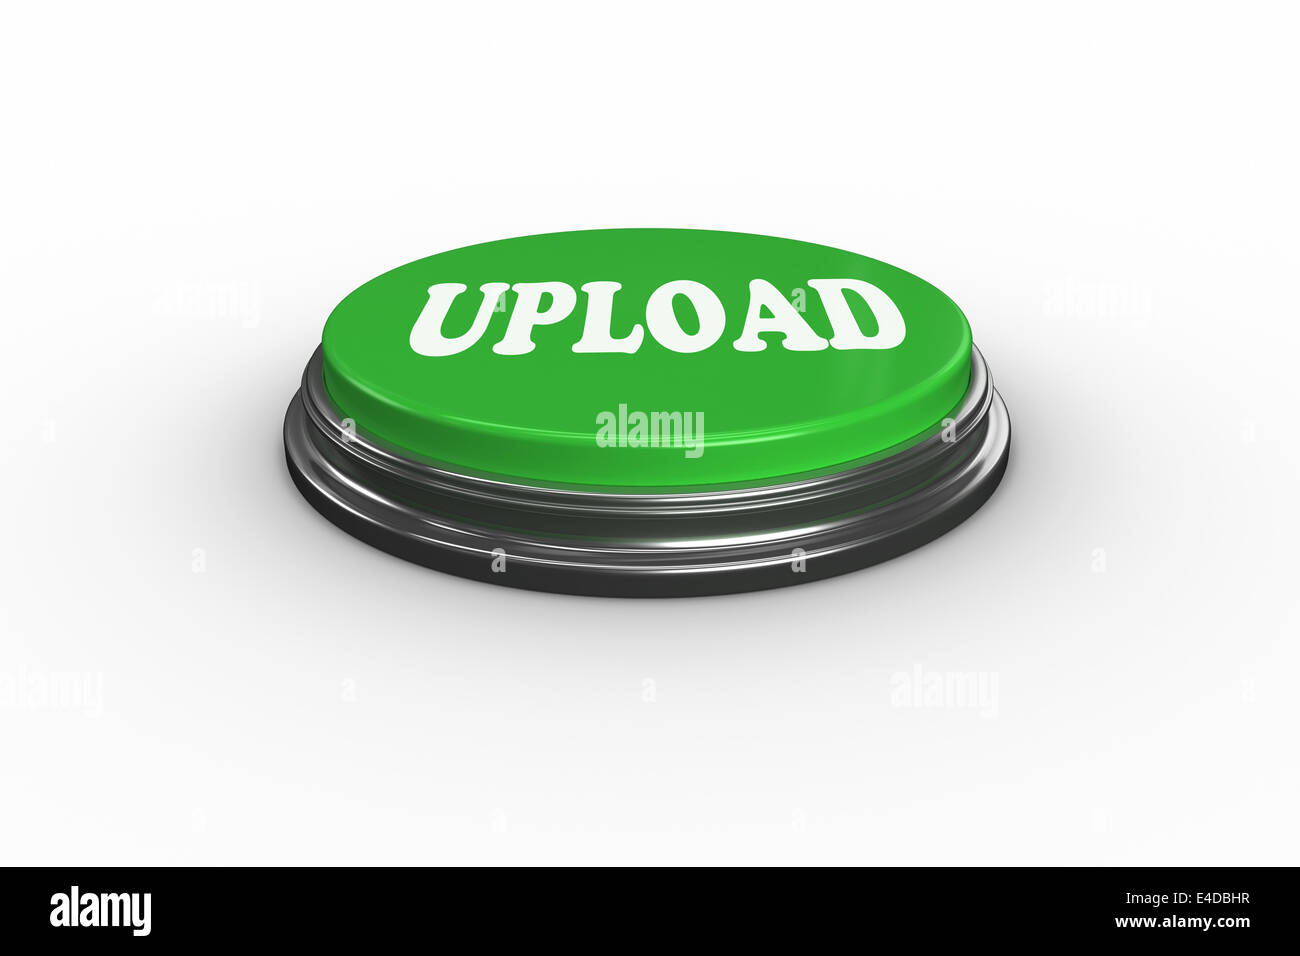 Upload on digitally generated green push button Stock Photo